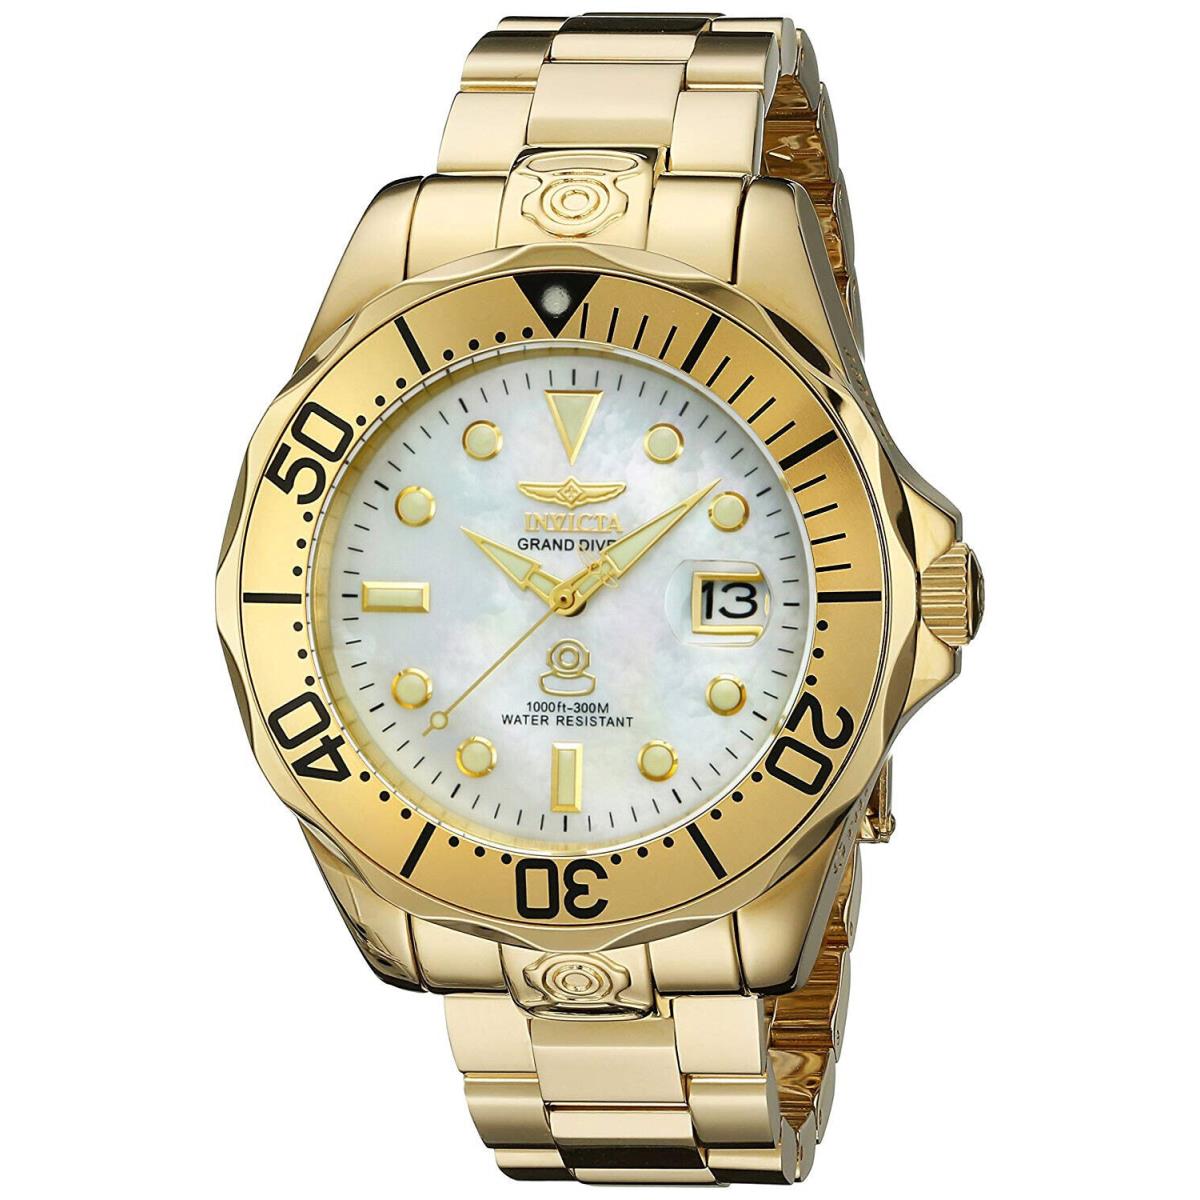 Invicta Men`s 13939 Grand Diver Gold Tone White Mop Dial SS Automatic Watch - White Mother Of Pearl Dial, Gold Band, Gold Bezel